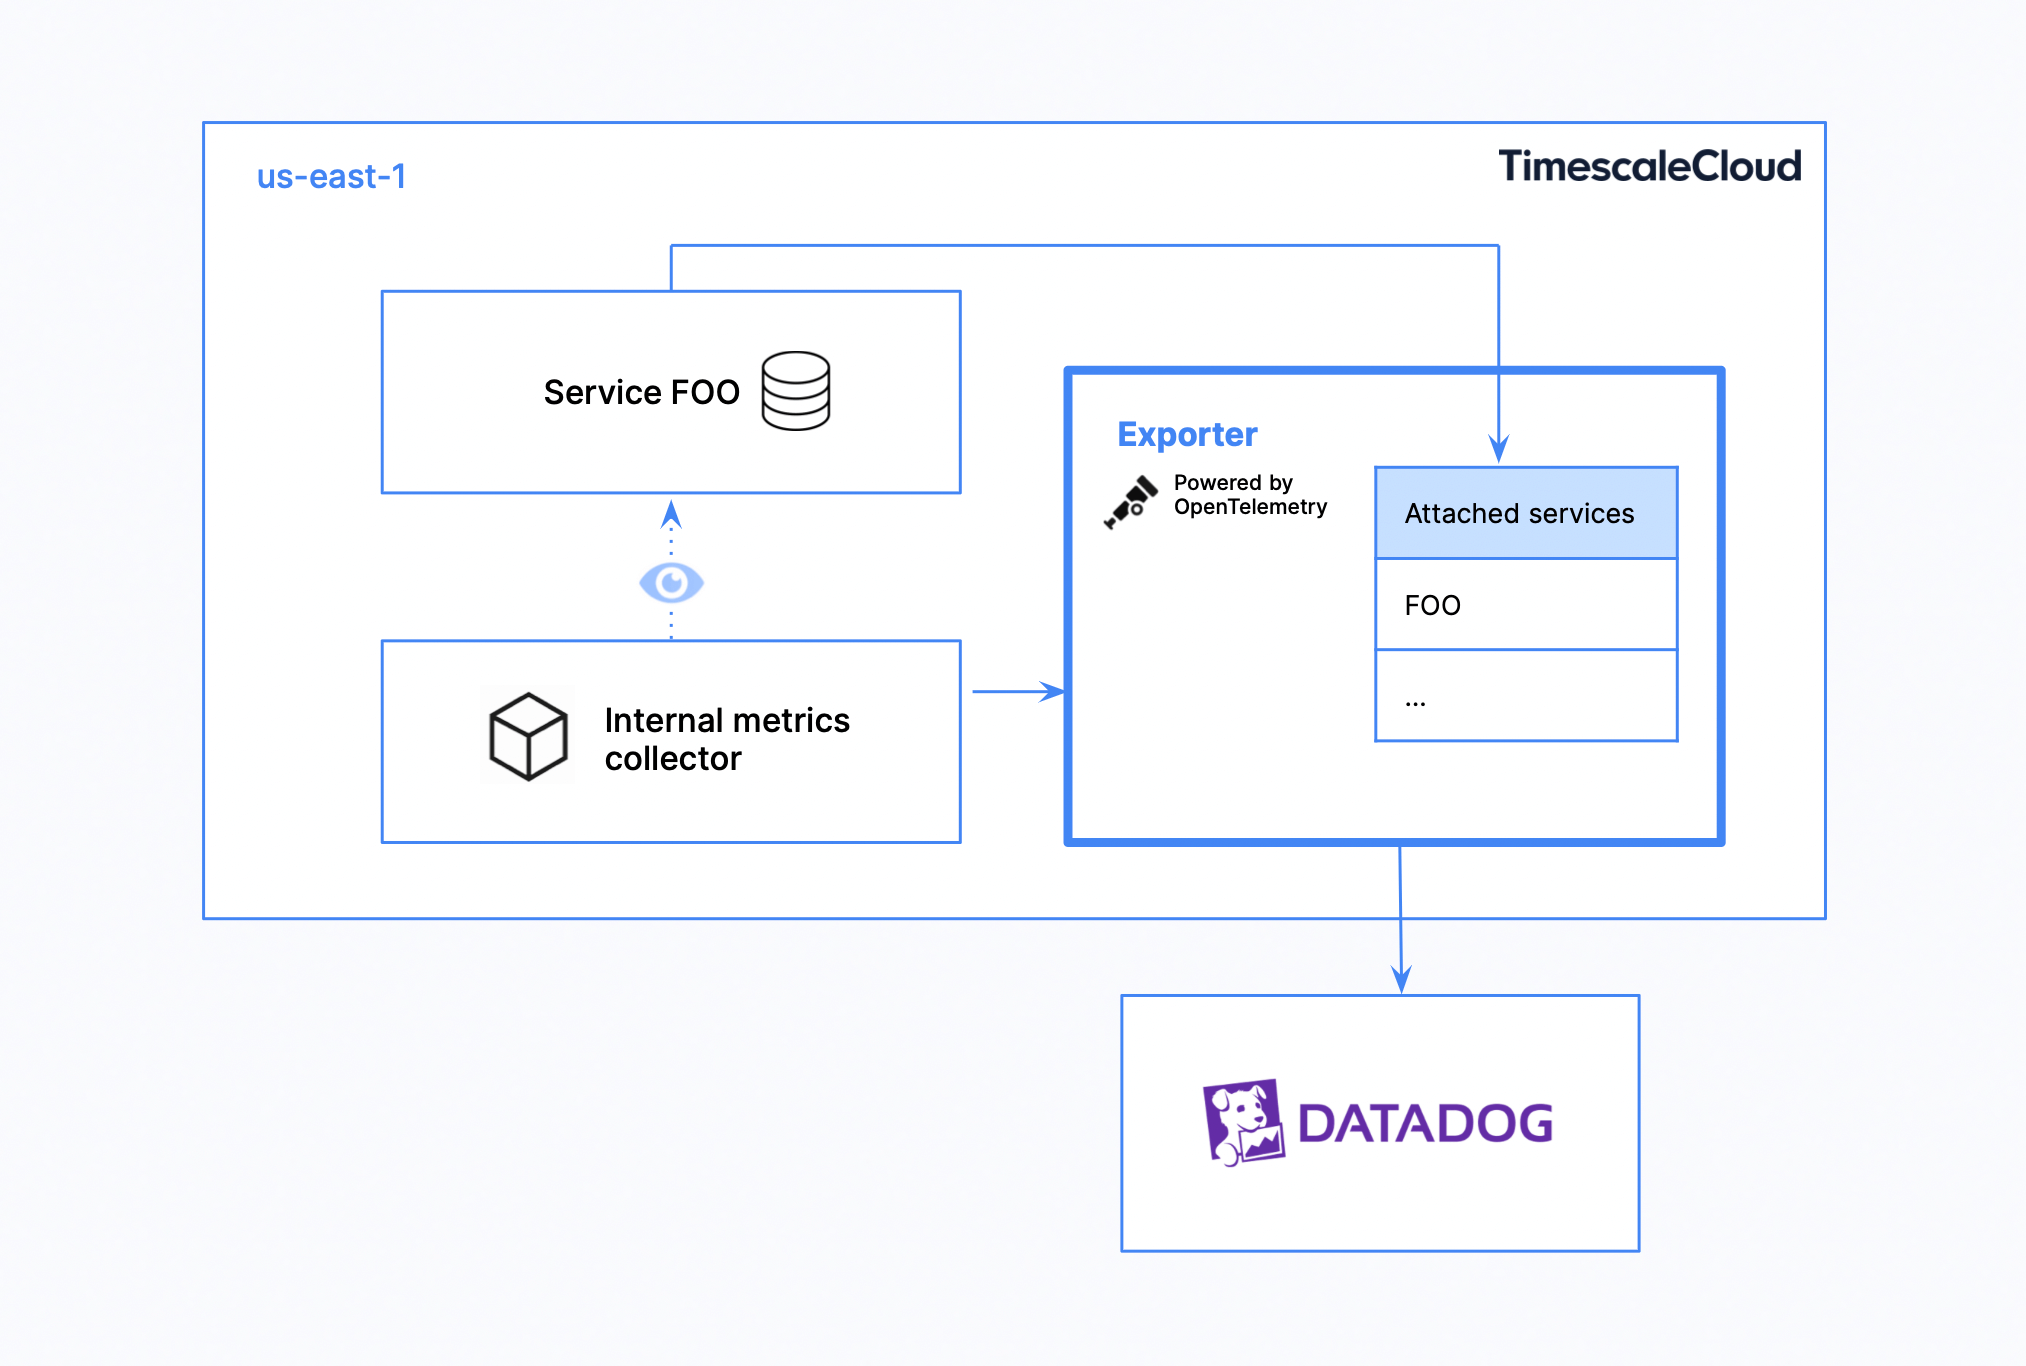 Architecture diagram showcasing the basic integration elements between Timescale Cloud and Datadog